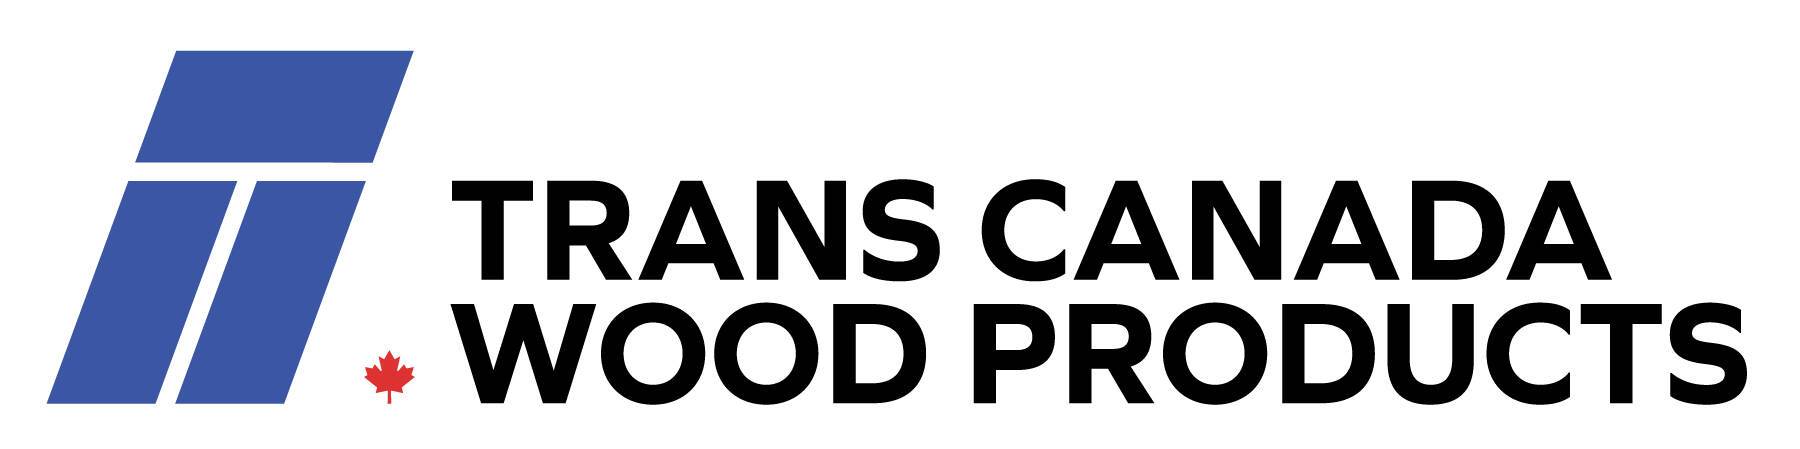 Trans Canada Wood Products